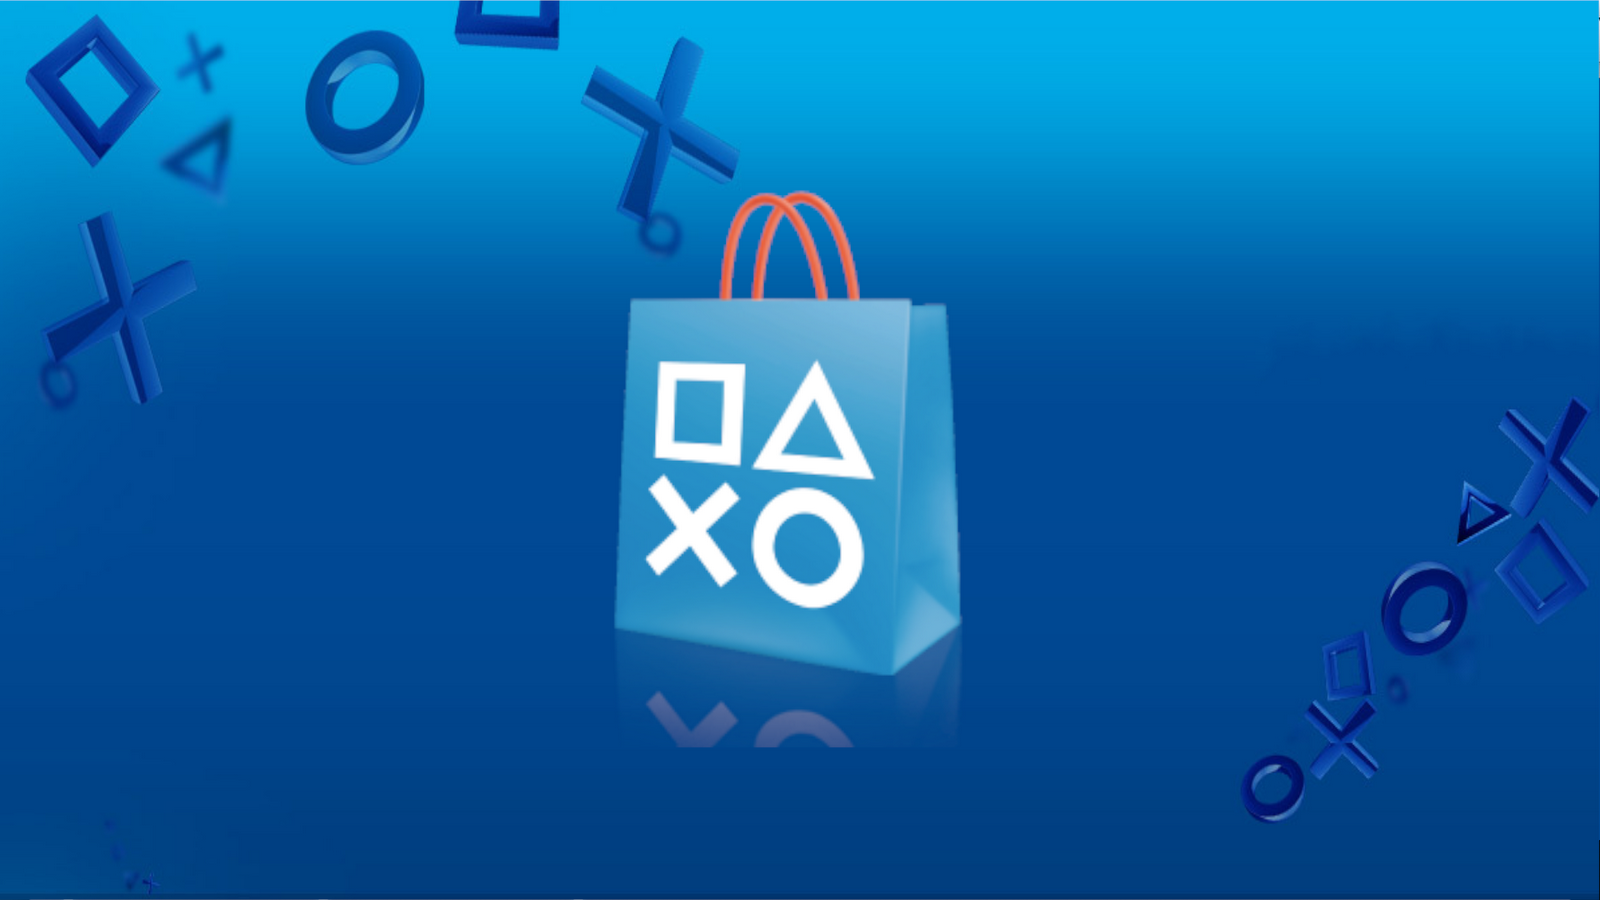 How To Request A Game Refund On The US PS Store - PlayStation Universe